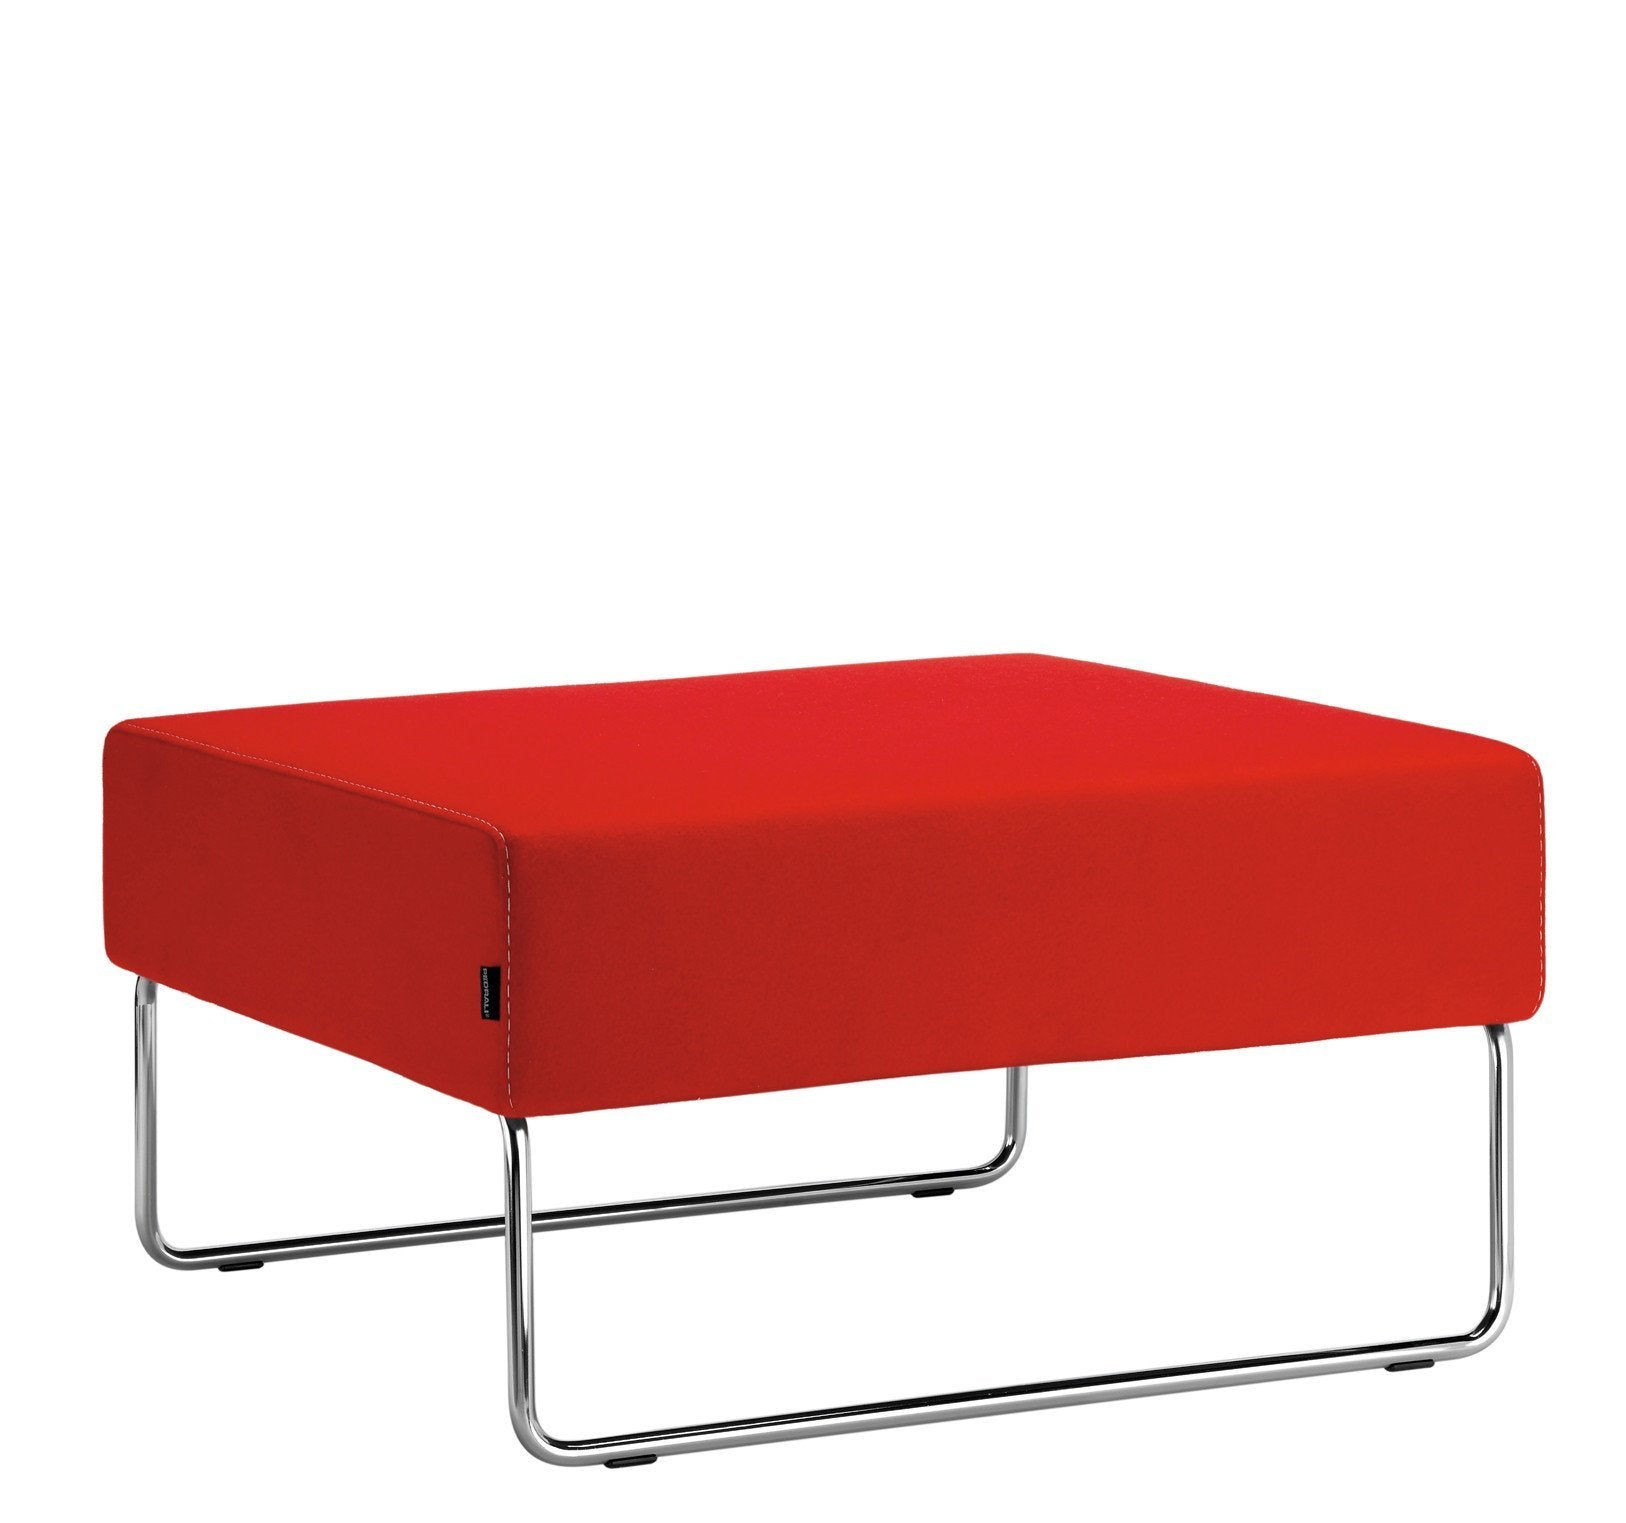 Host Lounge 793 Pouf-Pedrali-Contract Furniture Store